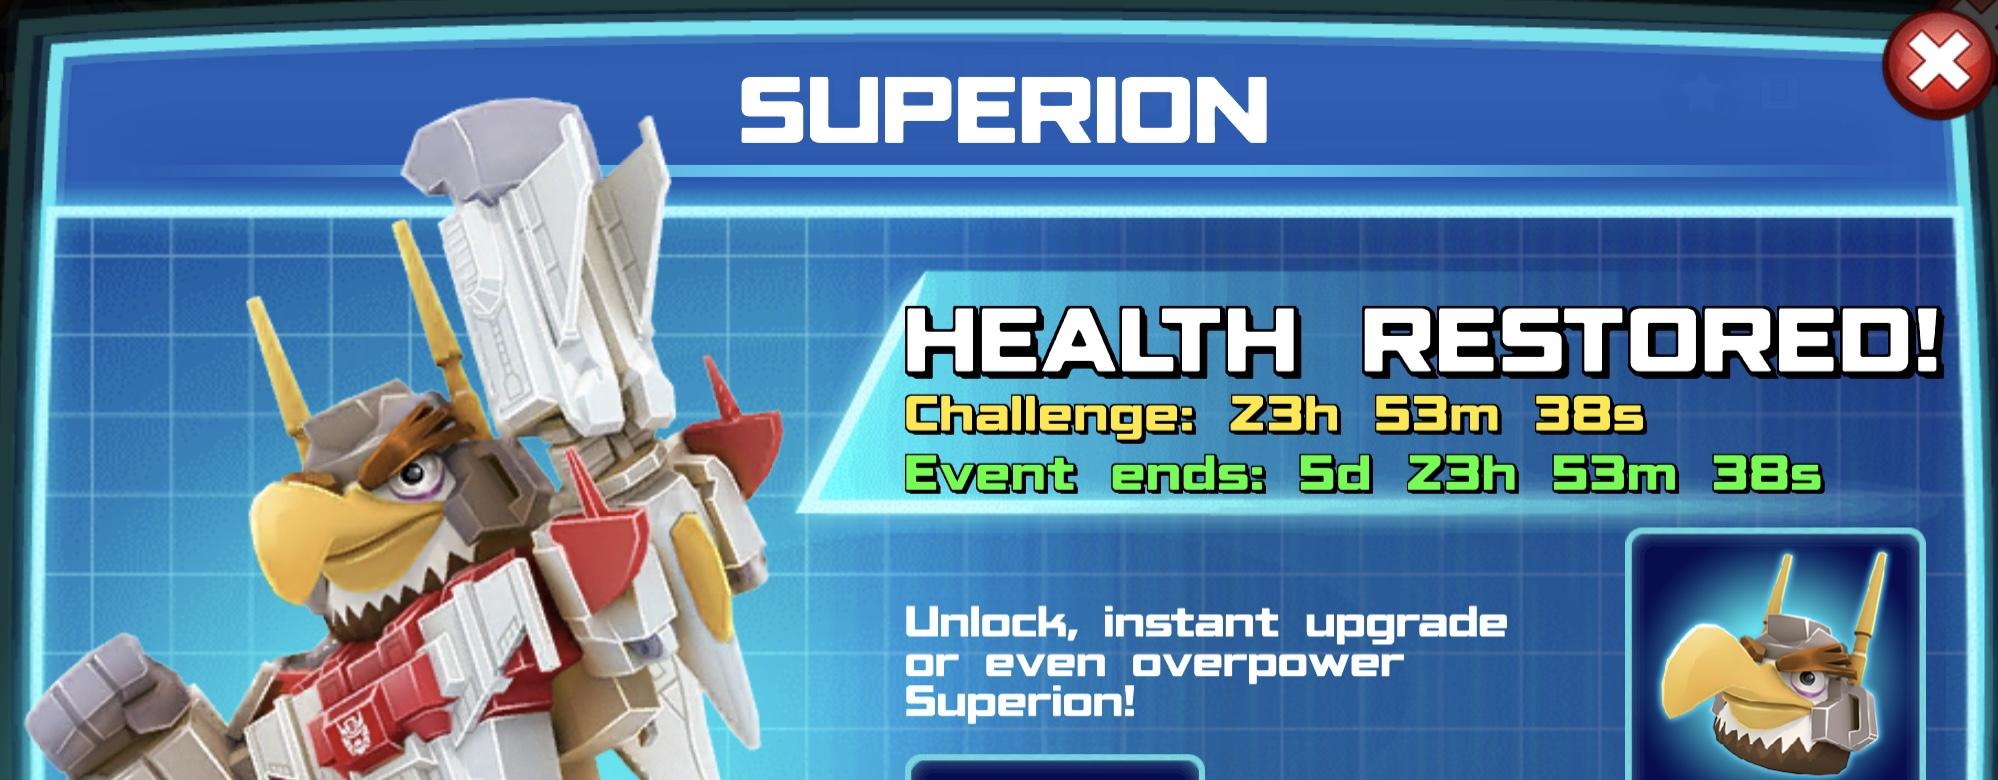 The event banner for Superion